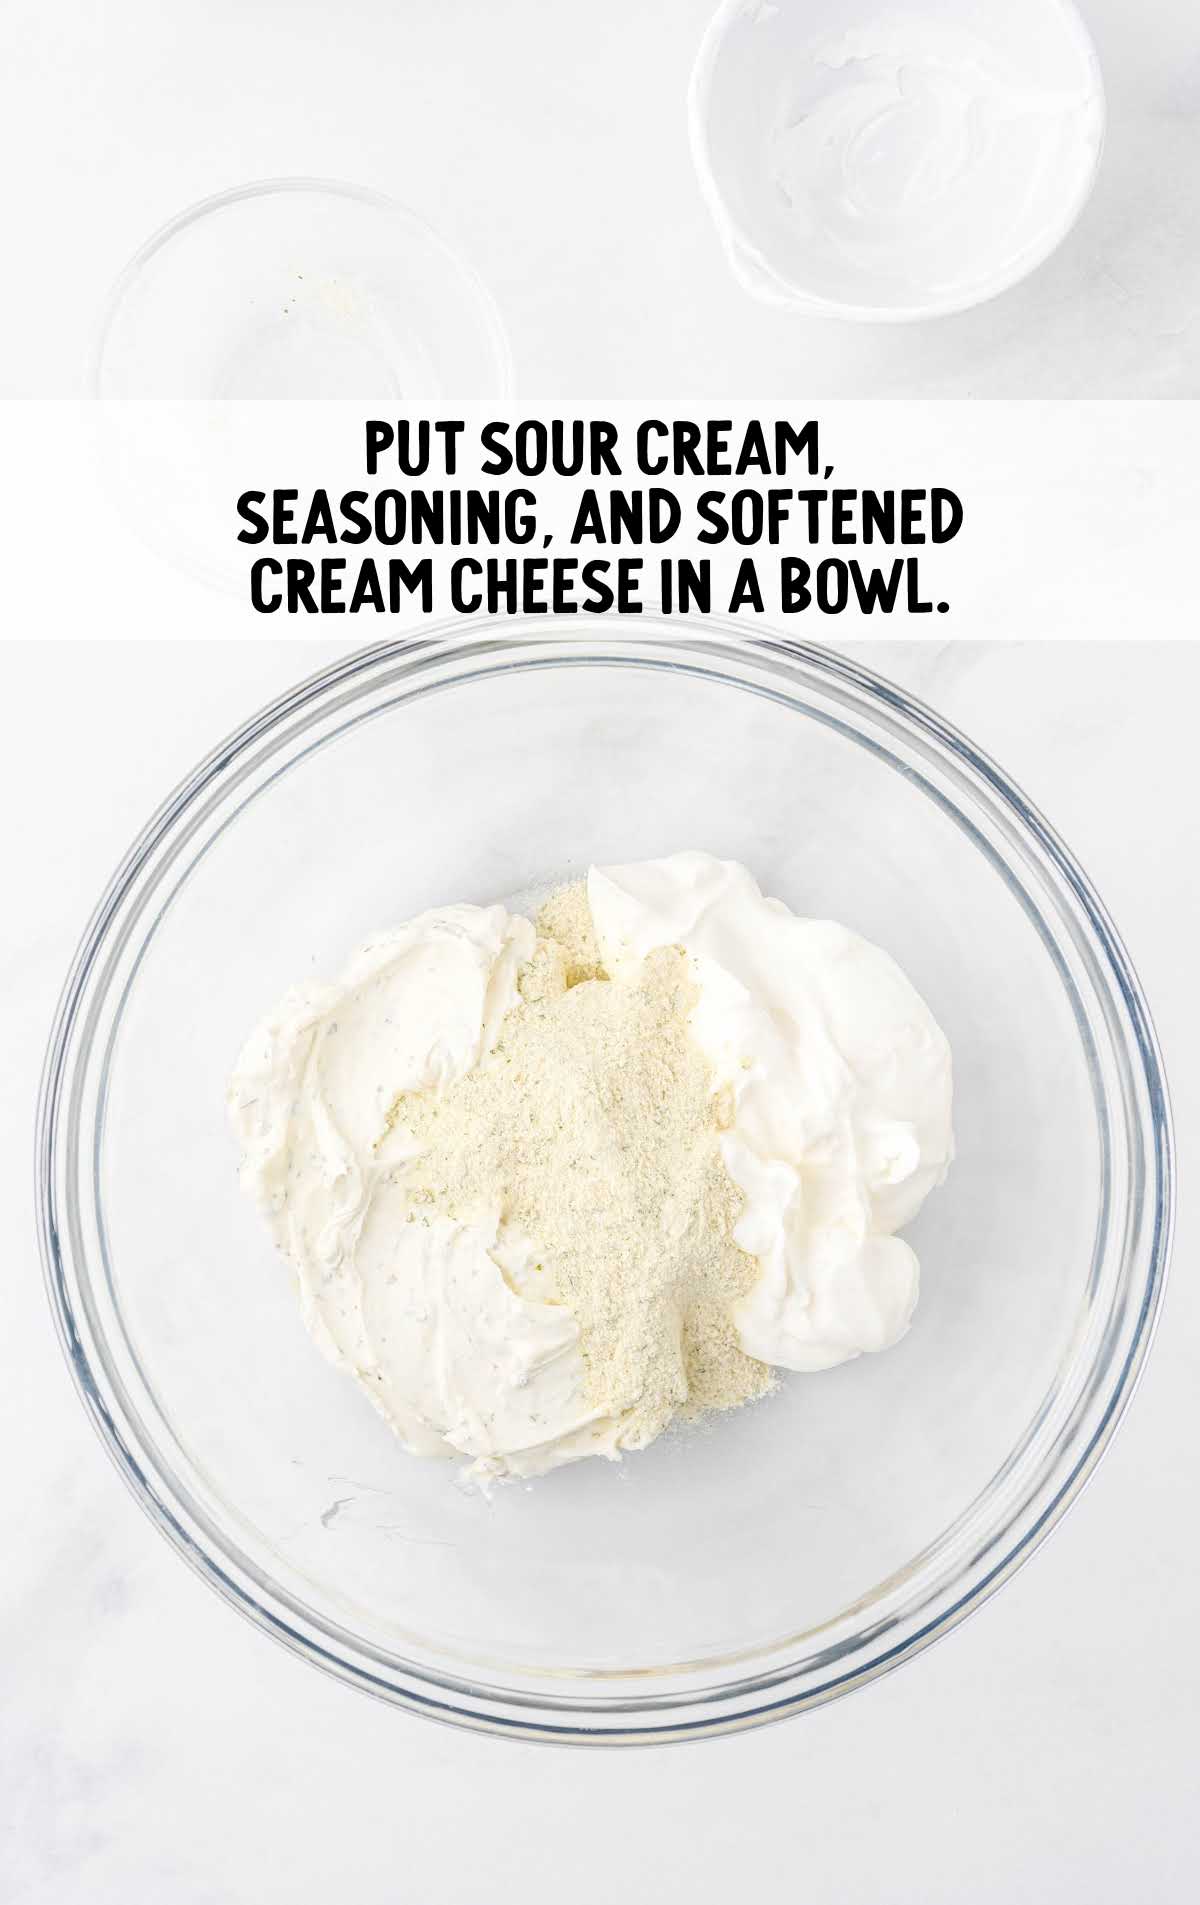 sour cream, seasoning, and softened cream cheese combined together